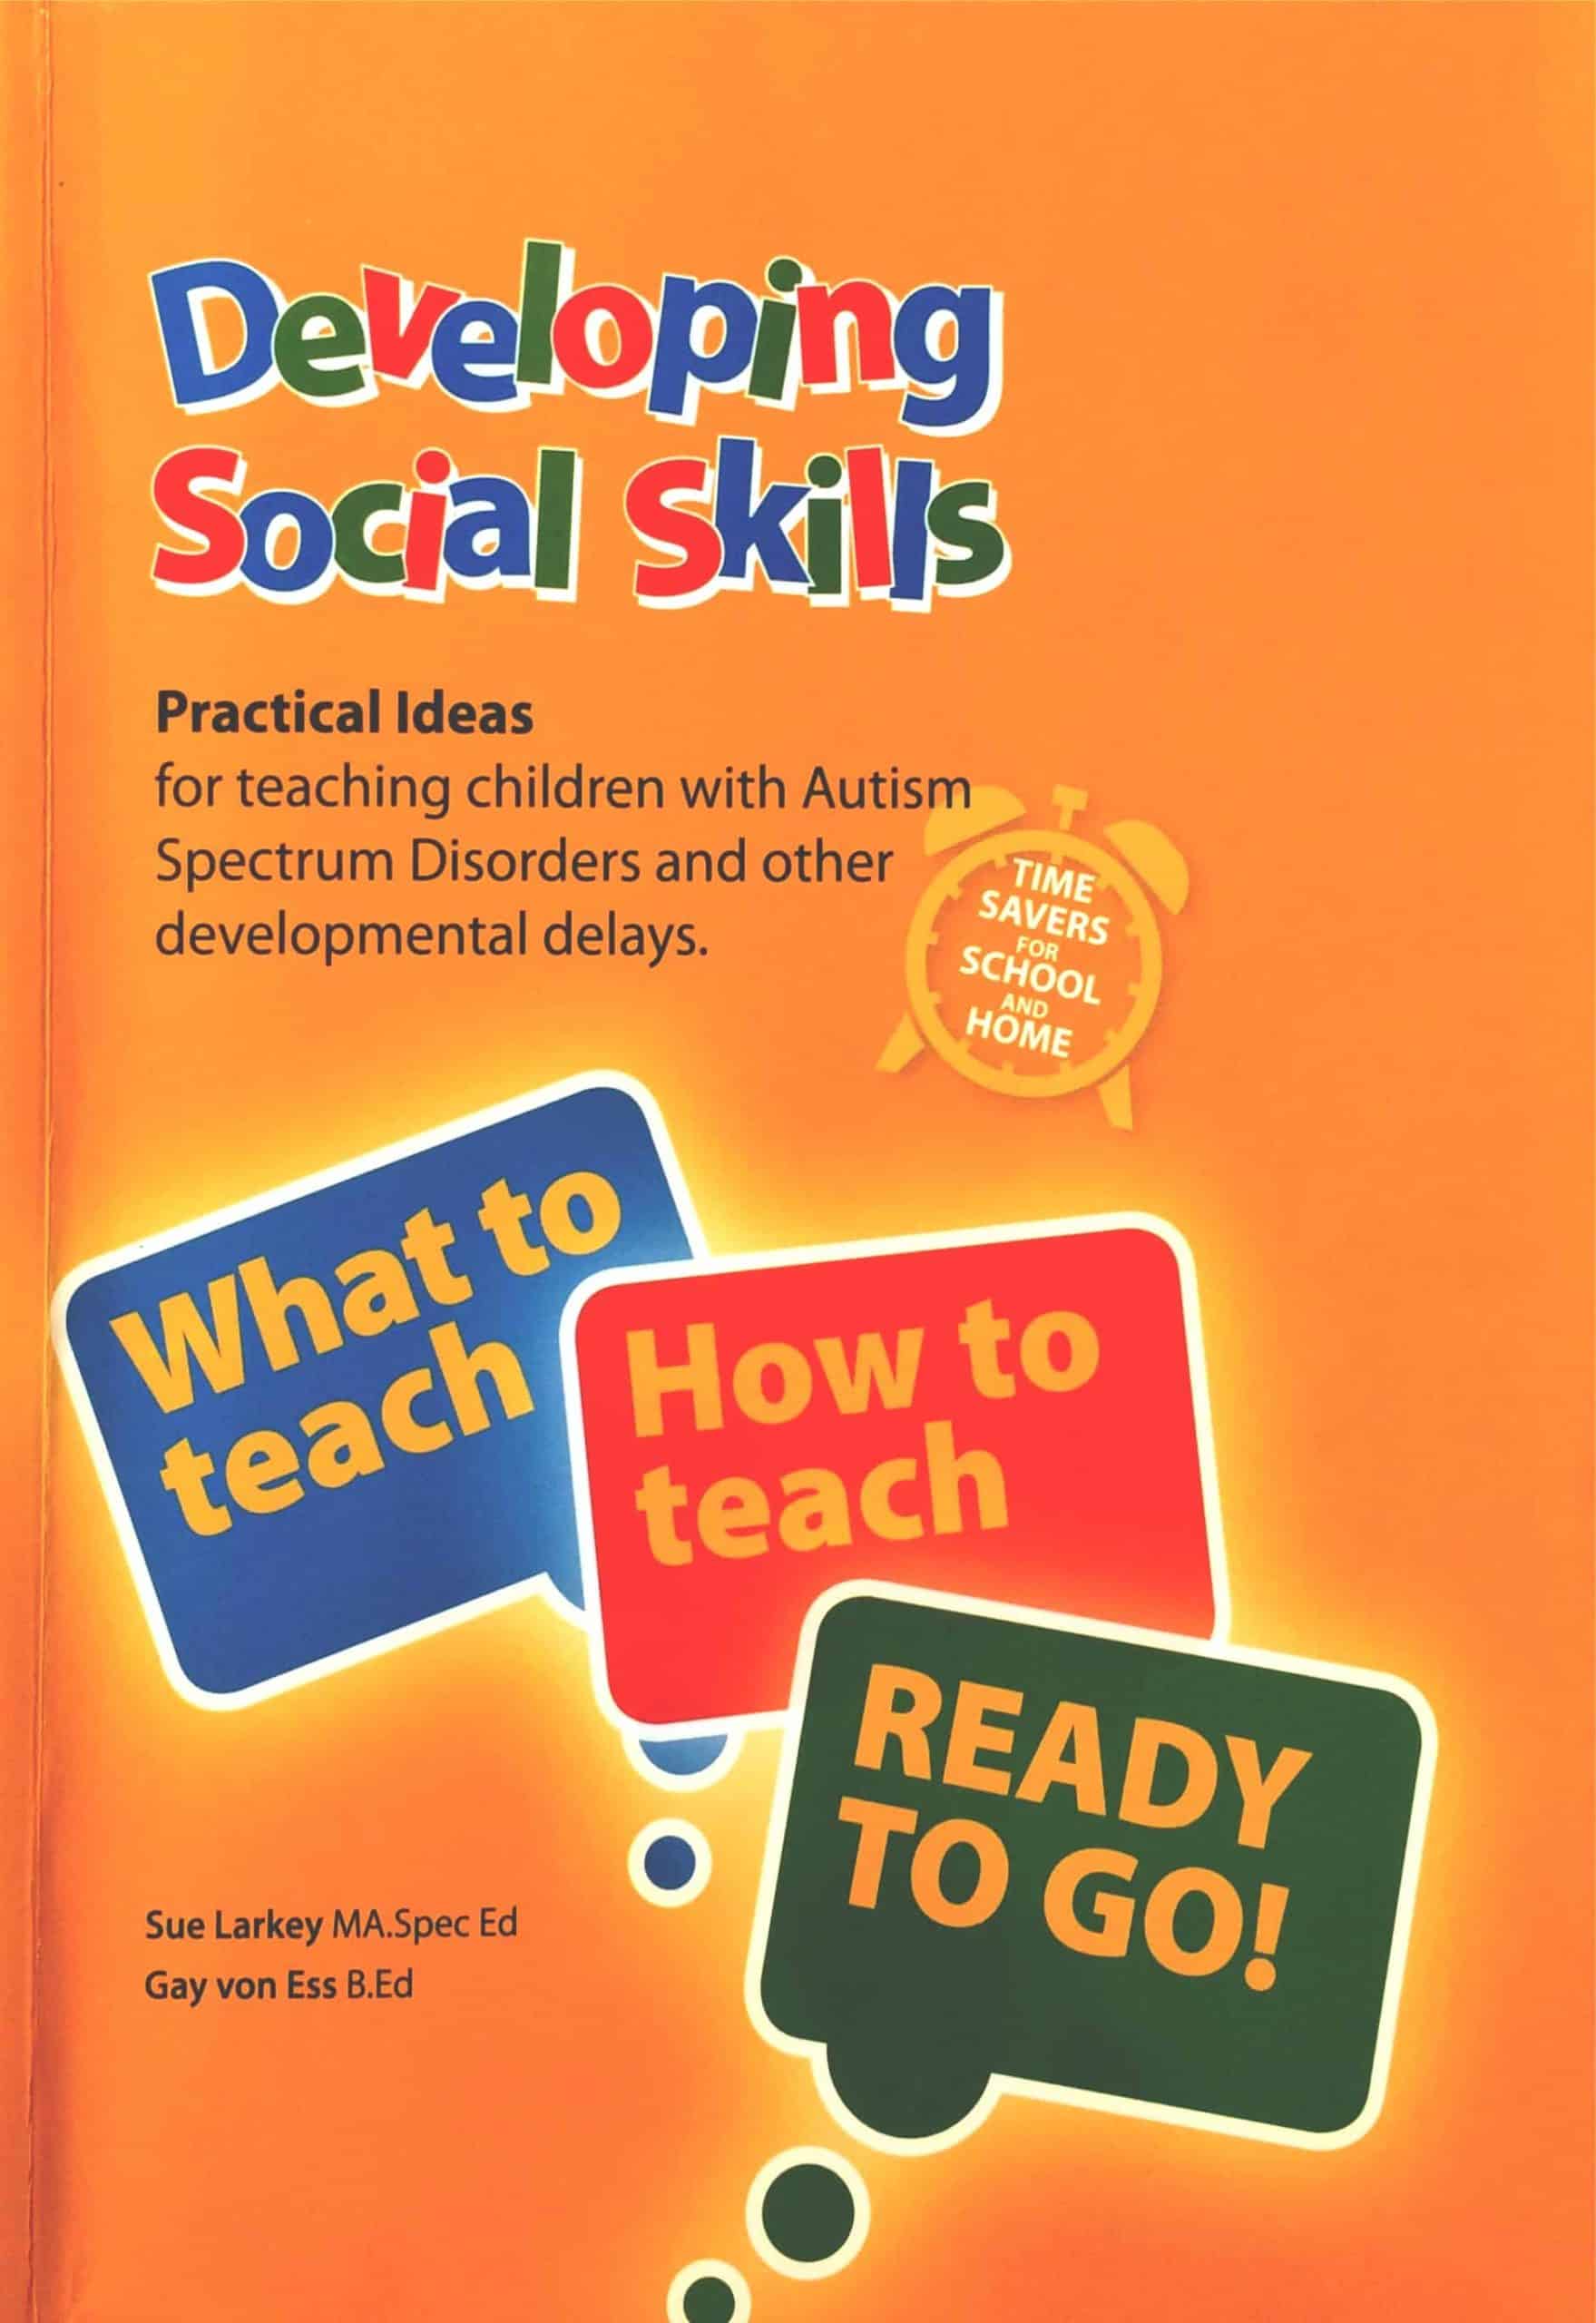 Book titled: Developing Social Skills; Practical Ideas for teaching children with Autism Spectrum Disorders and other developmental delays, by Sue Larkey and Gay von Ess